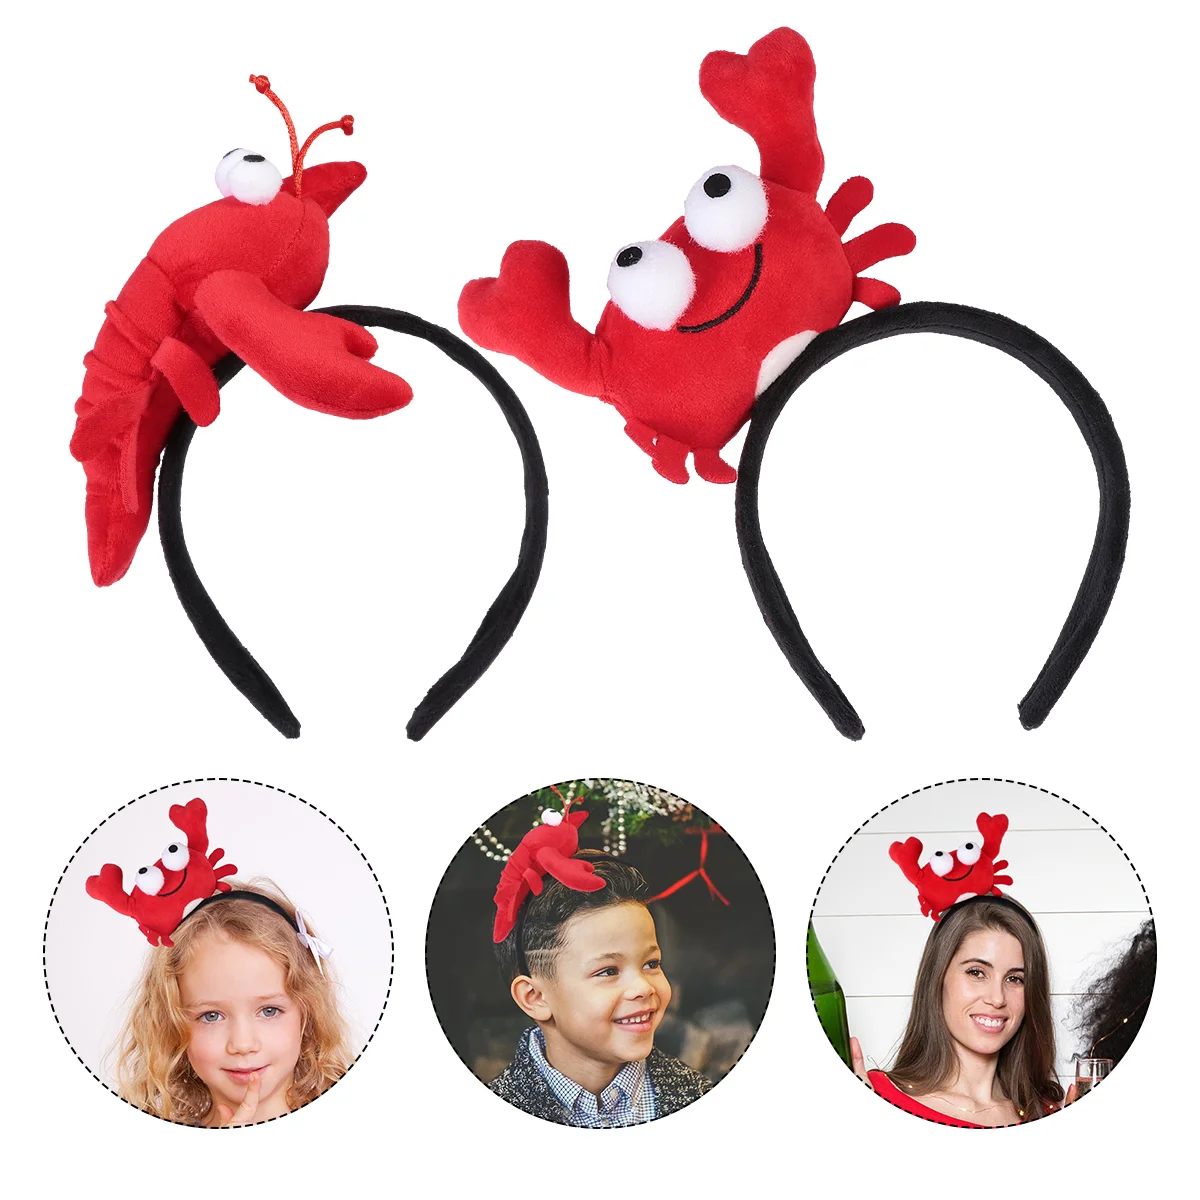 2Pcs Sea Decor Lobster Hairbands Cartoon Headdresses for Party (Lobster+Crab, Red) 2pcs lot 2019 new stage light 37x20w led rgbw 4in1 zoom wash moving head light led light party light dj stage night club